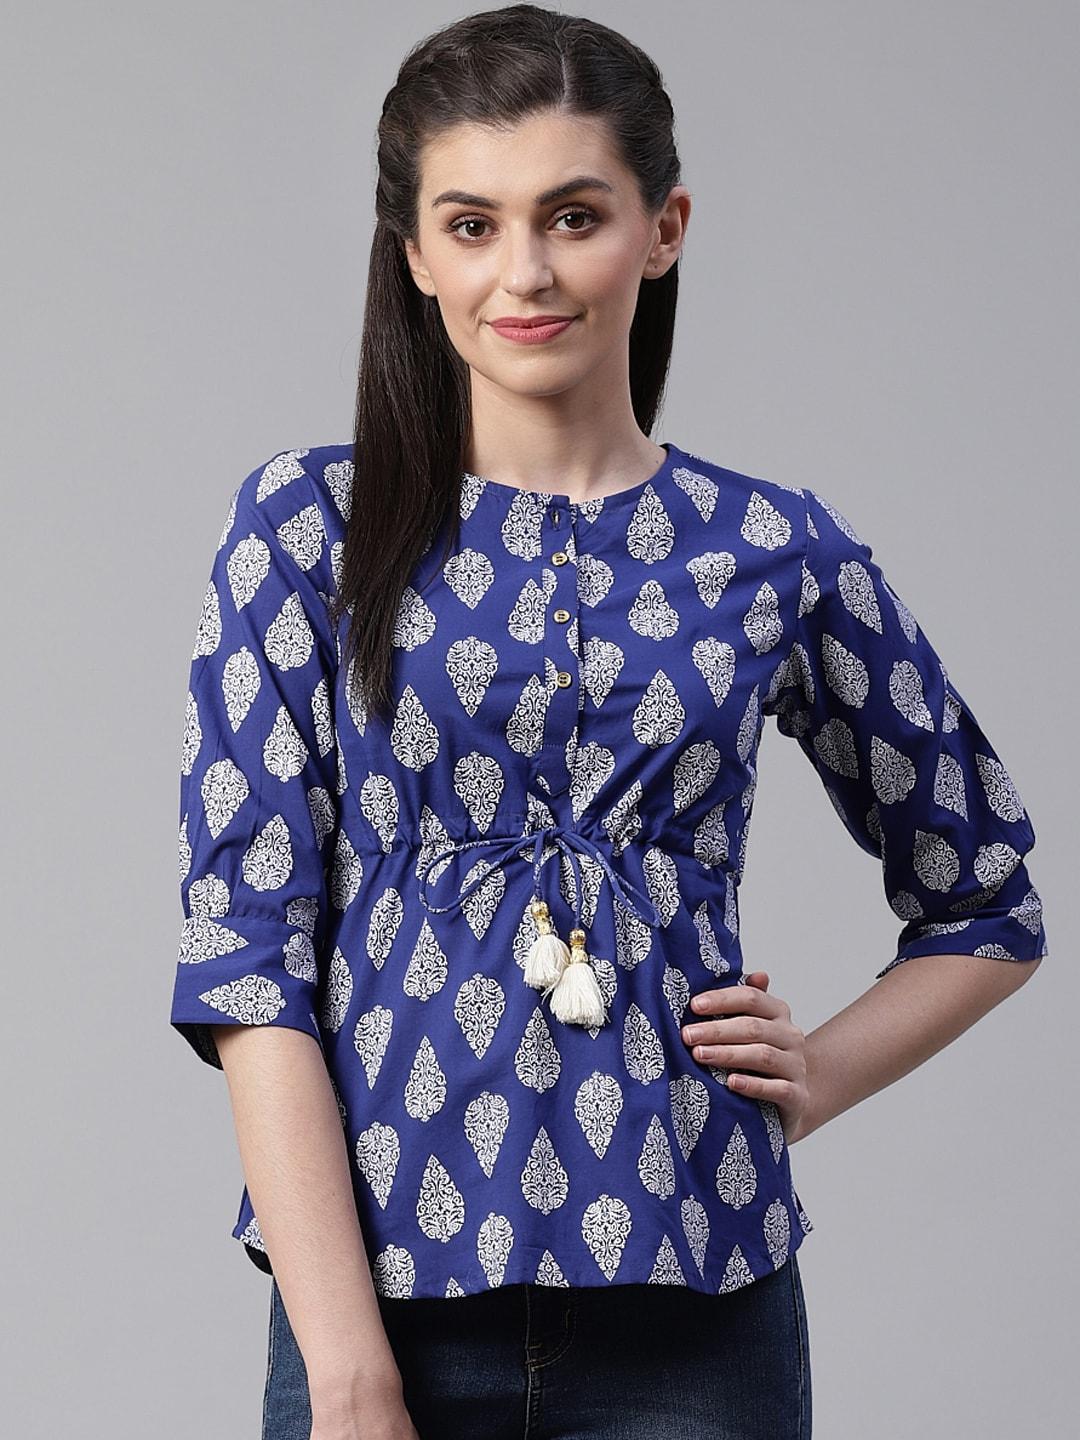 YASH GALLERY Women Navy Blue & White Printed Ethnic Cinched Waist Top